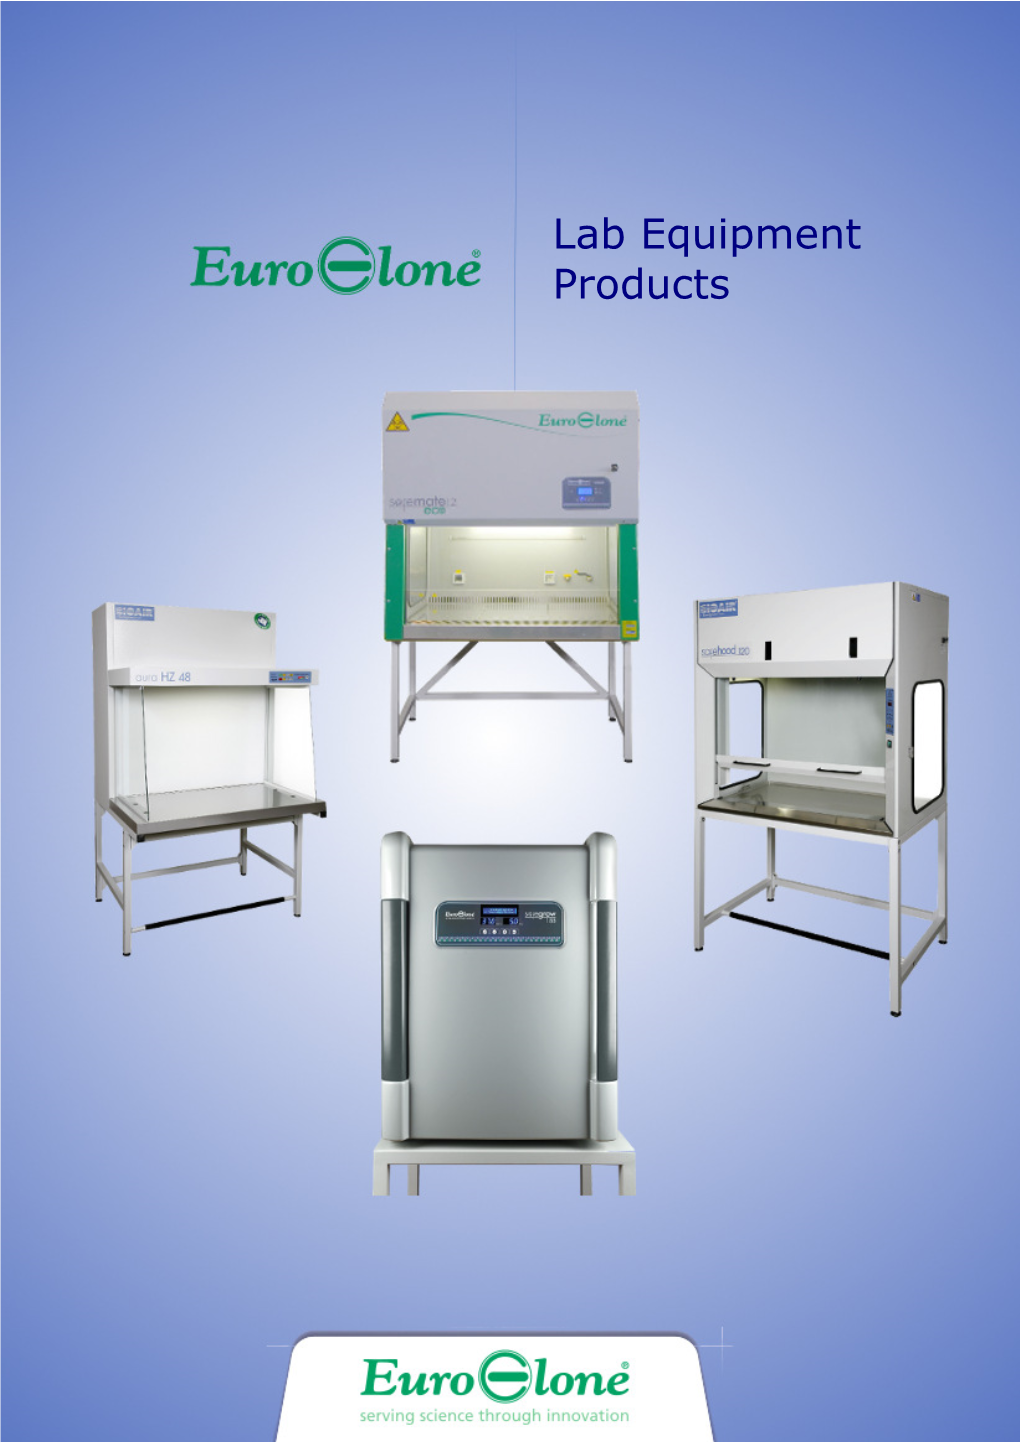 Lab Equipment Products 2 SUMMARY